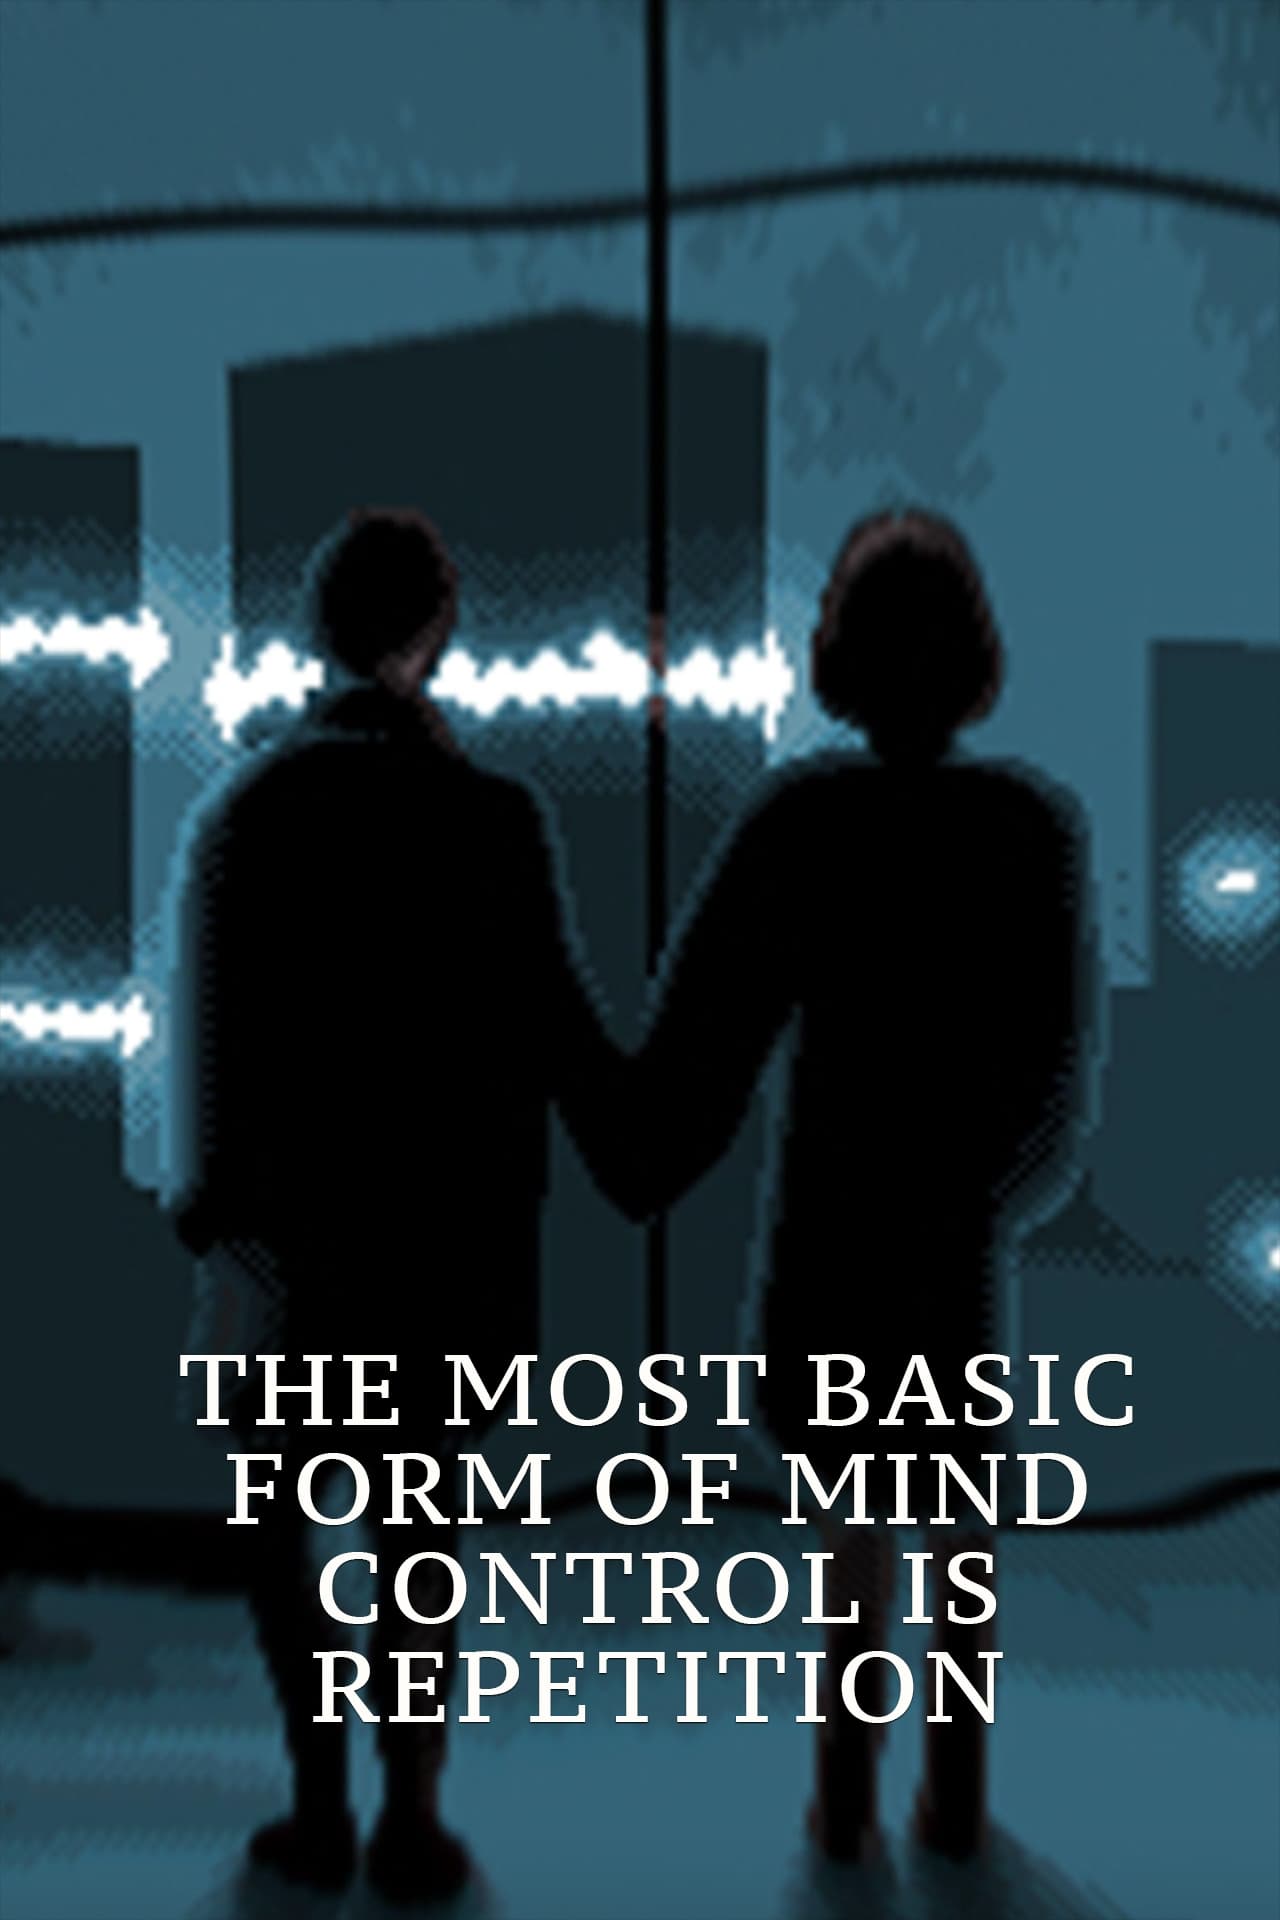 The Most Basic Form of Mind Control is Repetition